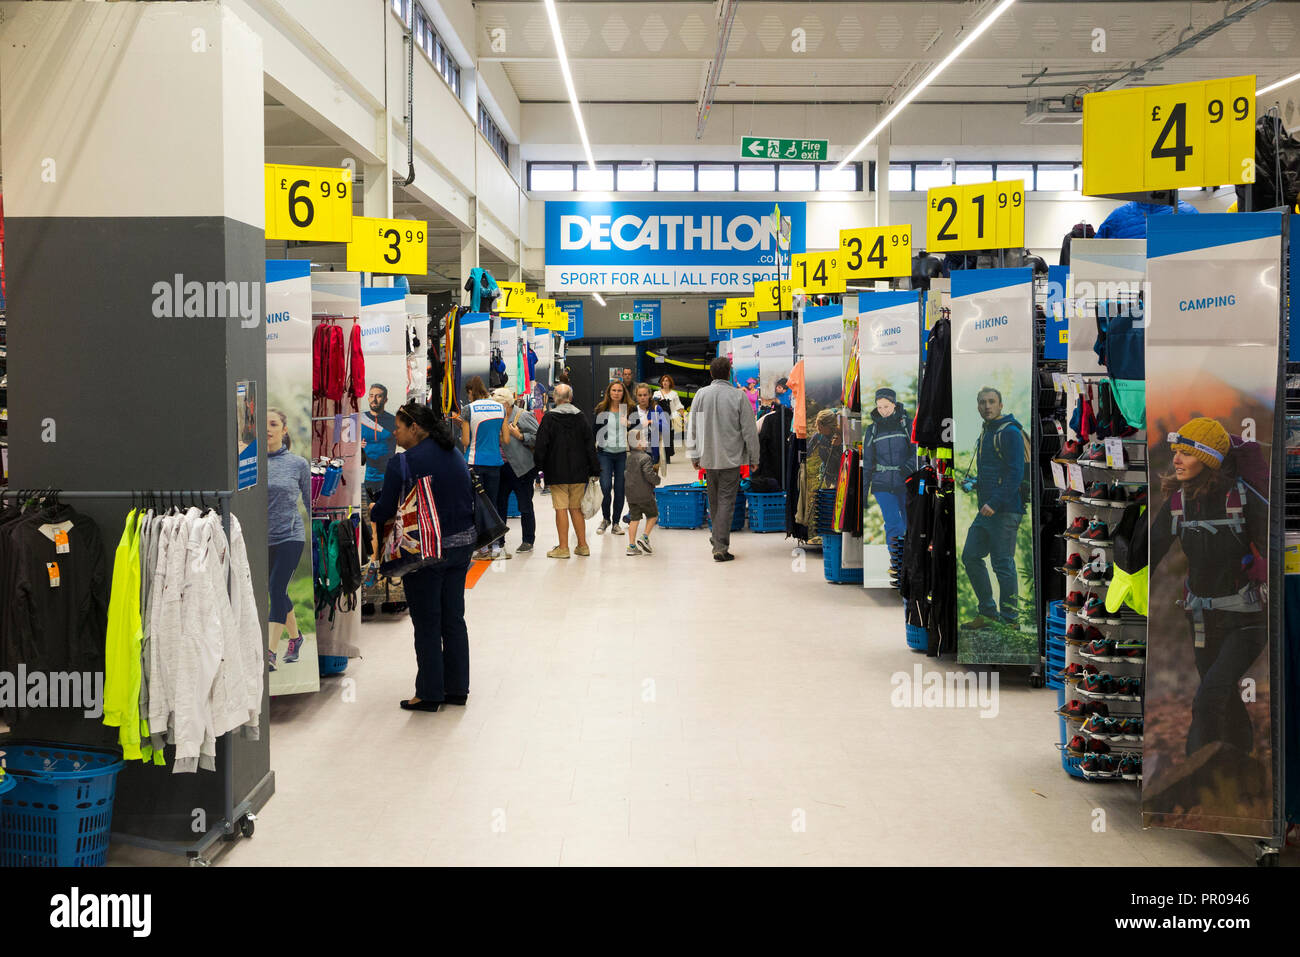 Sports Retailer Shop High Resolution Stock Photography and Images - Alamy